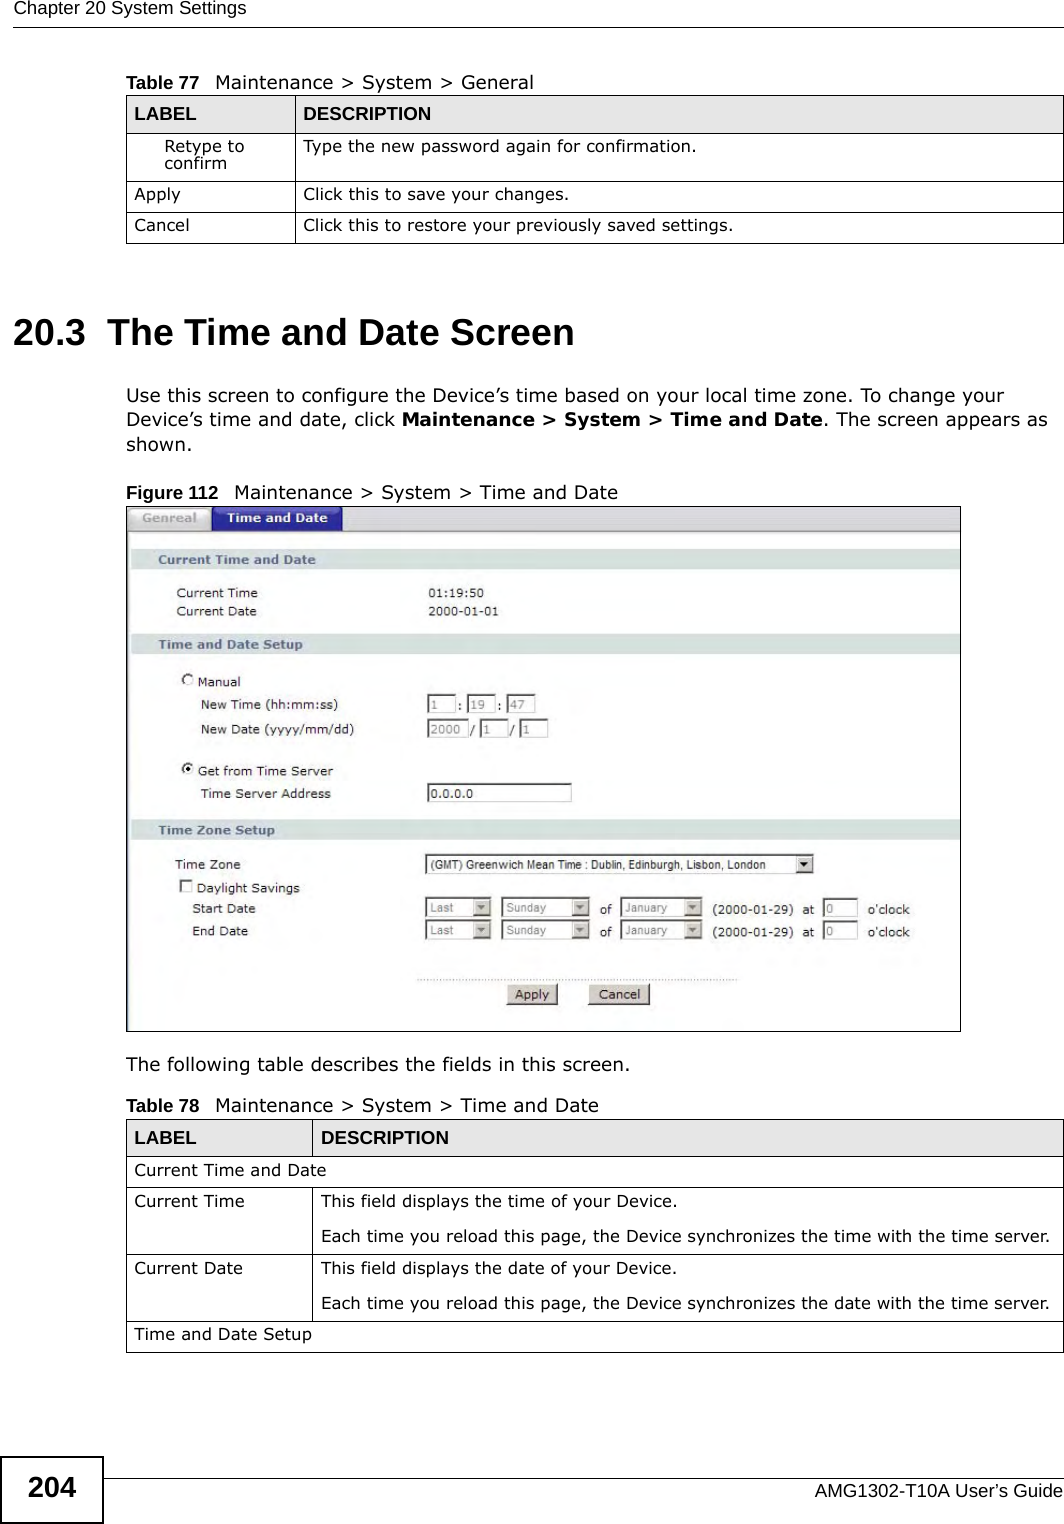 Chapter 20 System SettingsAMG1302-T10A User’s Guide20420.3  The Time and Date Screen Use this screen to configure the Device’s time based on your local time zone. To change your Device’s time and date, click Maintenance &gt; System &gt; Time and Date. The screen appears as shown.Figure 112   Maintenance &gt; System &gt; Time and DateThe following table describes the fields in this screen. Retype to confirm Type the new password again for confirmation.Apply Click this to save your changes.Cancel Click this to restore your previously saved settings.Table 77   Maintenance &gt; System &gt; GeneralLABEL DESCRIPTIONTable 78   Maintenance &gt; System &gt; Time and DateLABEL DESCRIPTIONCurrent Time and DateCurrent Time  This field displays the time of your Device.Each time you reload this page, the Device synchronizes the time with the time server.Current Date  This field displays the date of your Device. Each time you reload this page, the Device synchronizes the date with the time server.Time and Date Setup